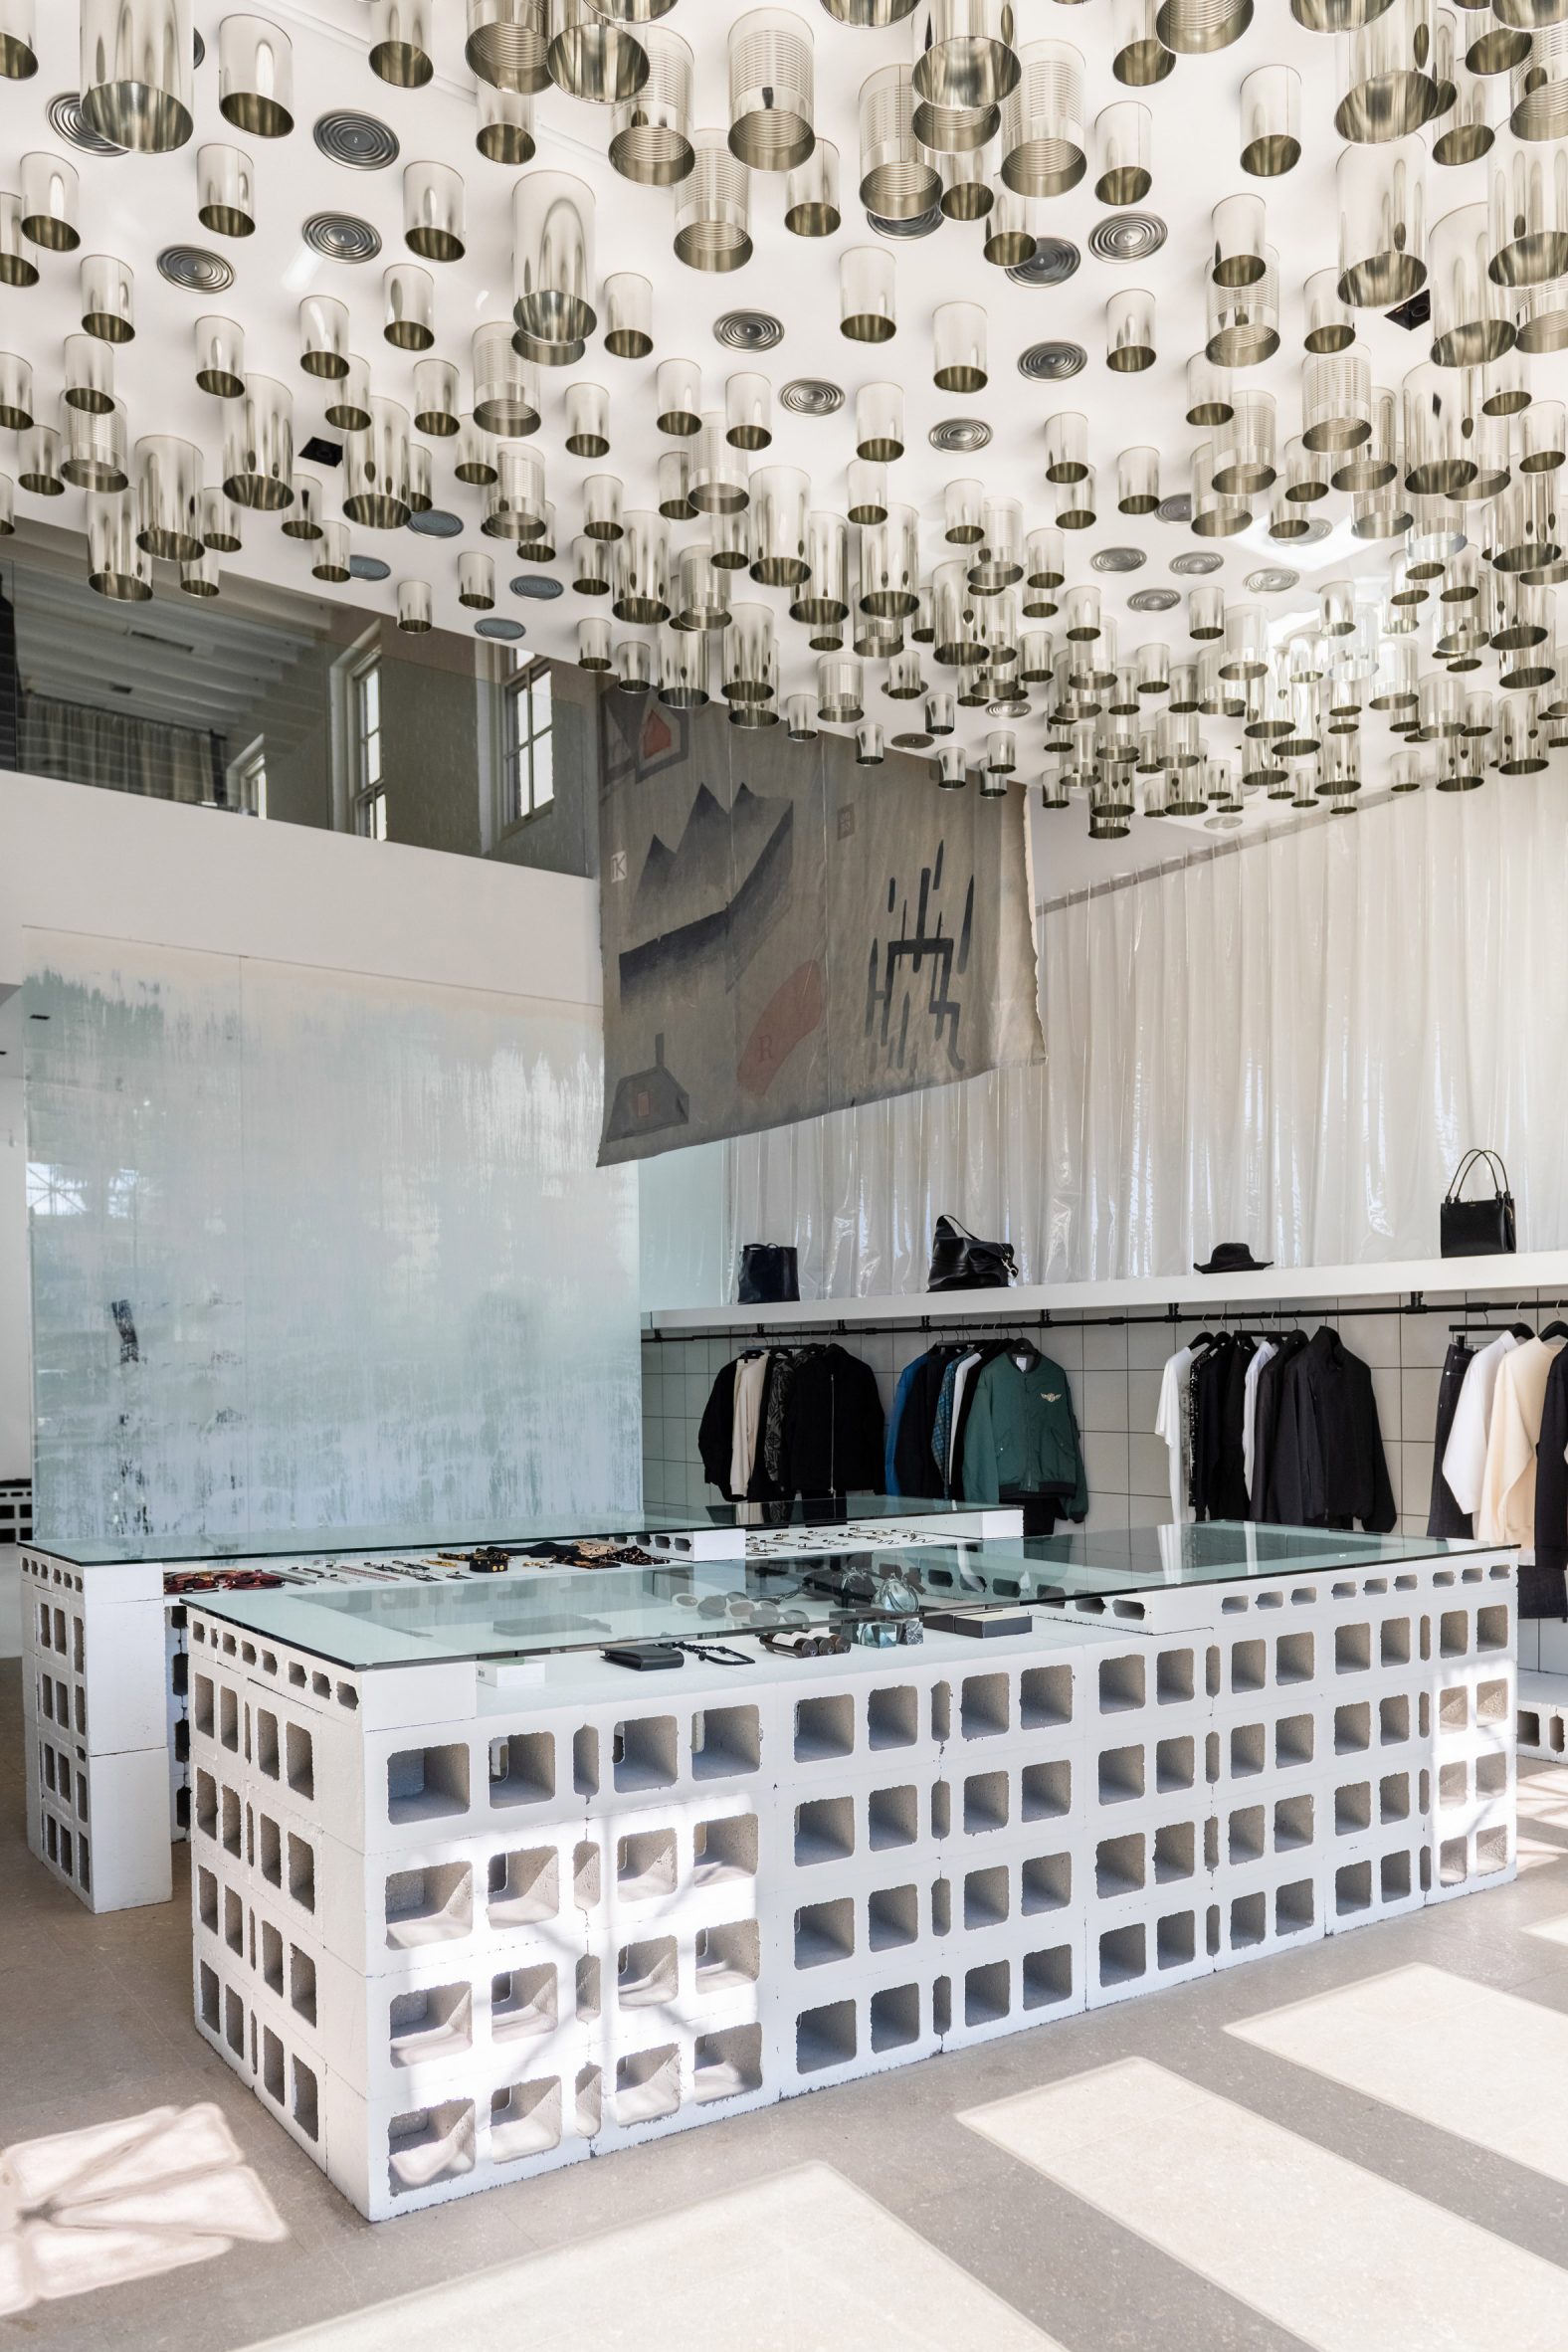 Store with concrete breezeblock displays and metal cans on the ceiling